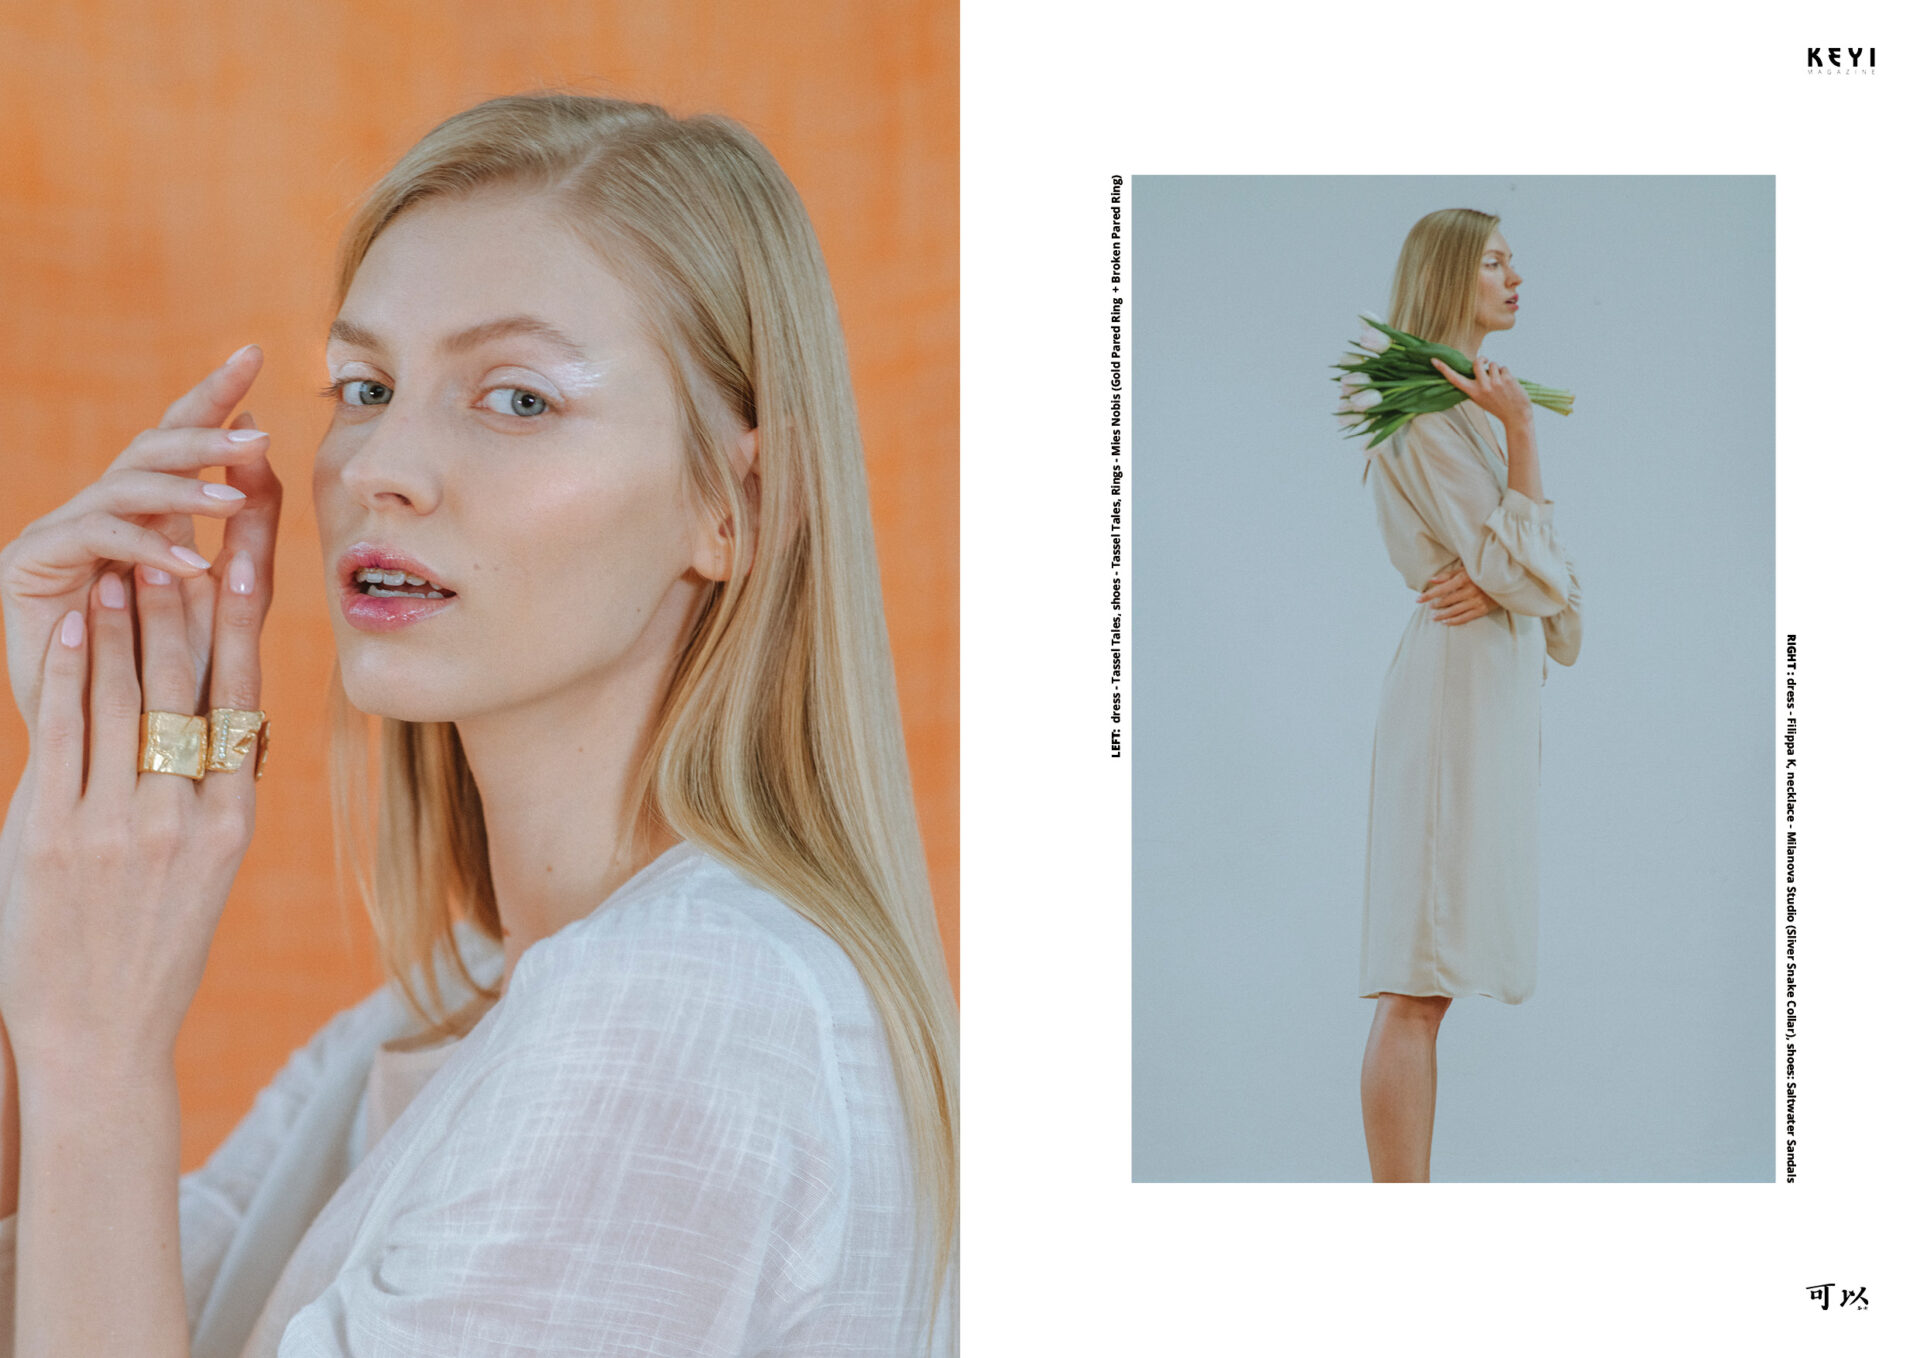 STREAM OF CONSCIOUSNESS by KEYI STUDIO with Karolina Czar from Selective Mgmt. Styling by Klaudia Kolodziej. Hair by Evin Yeyrek. Make Up Justina 